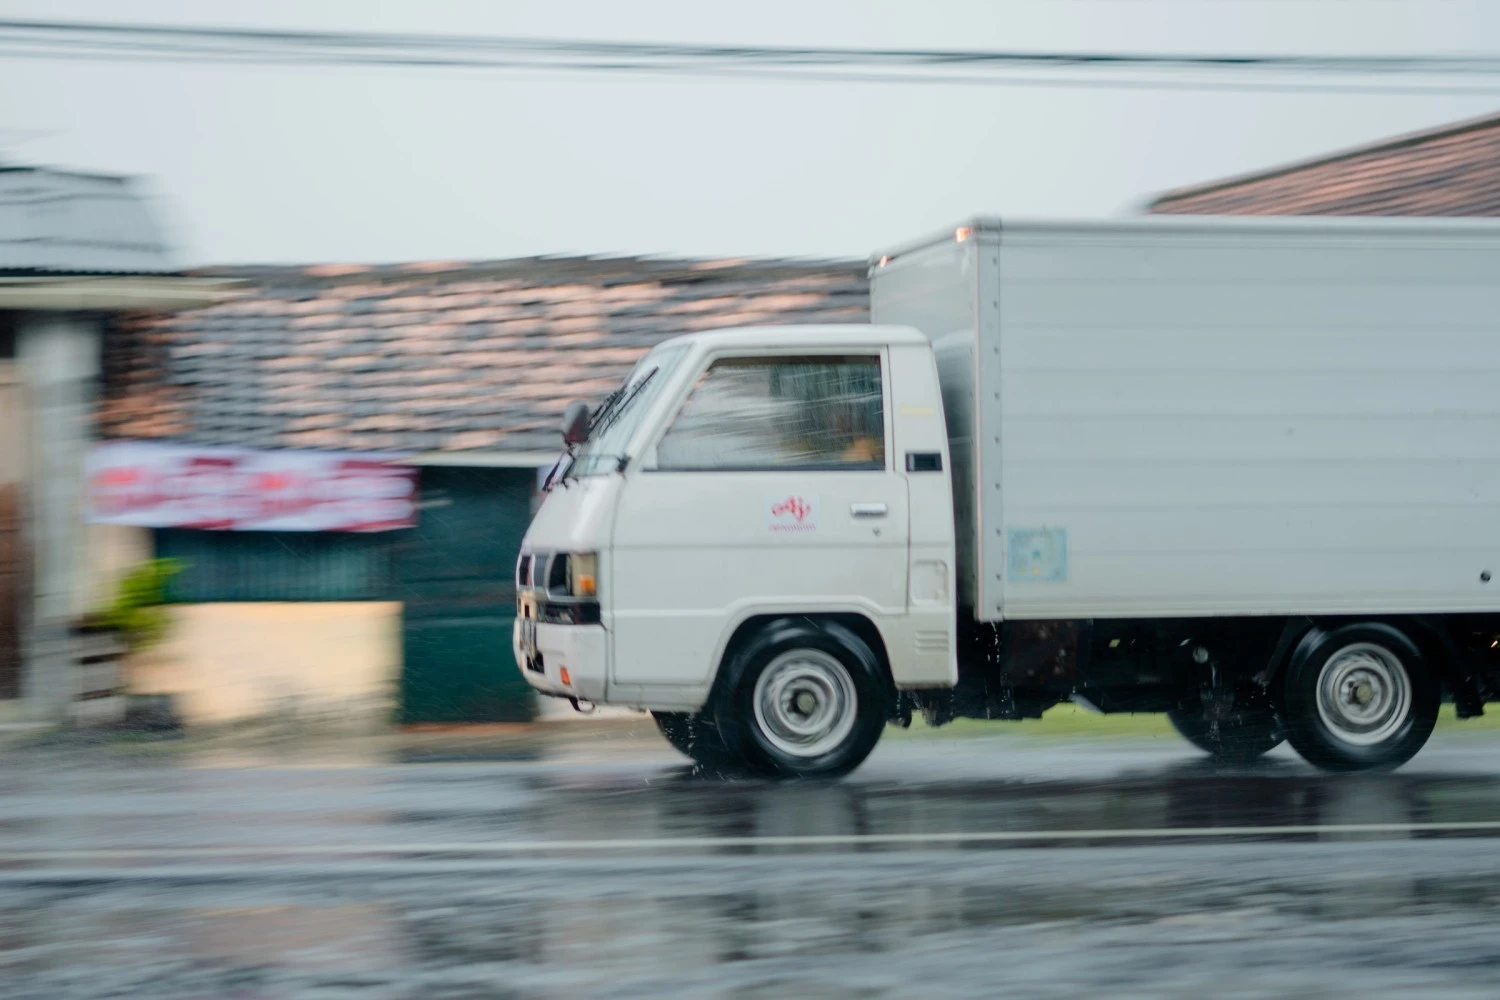 Removalist Trucks for Sale: Moving Truck Size You Should Choose